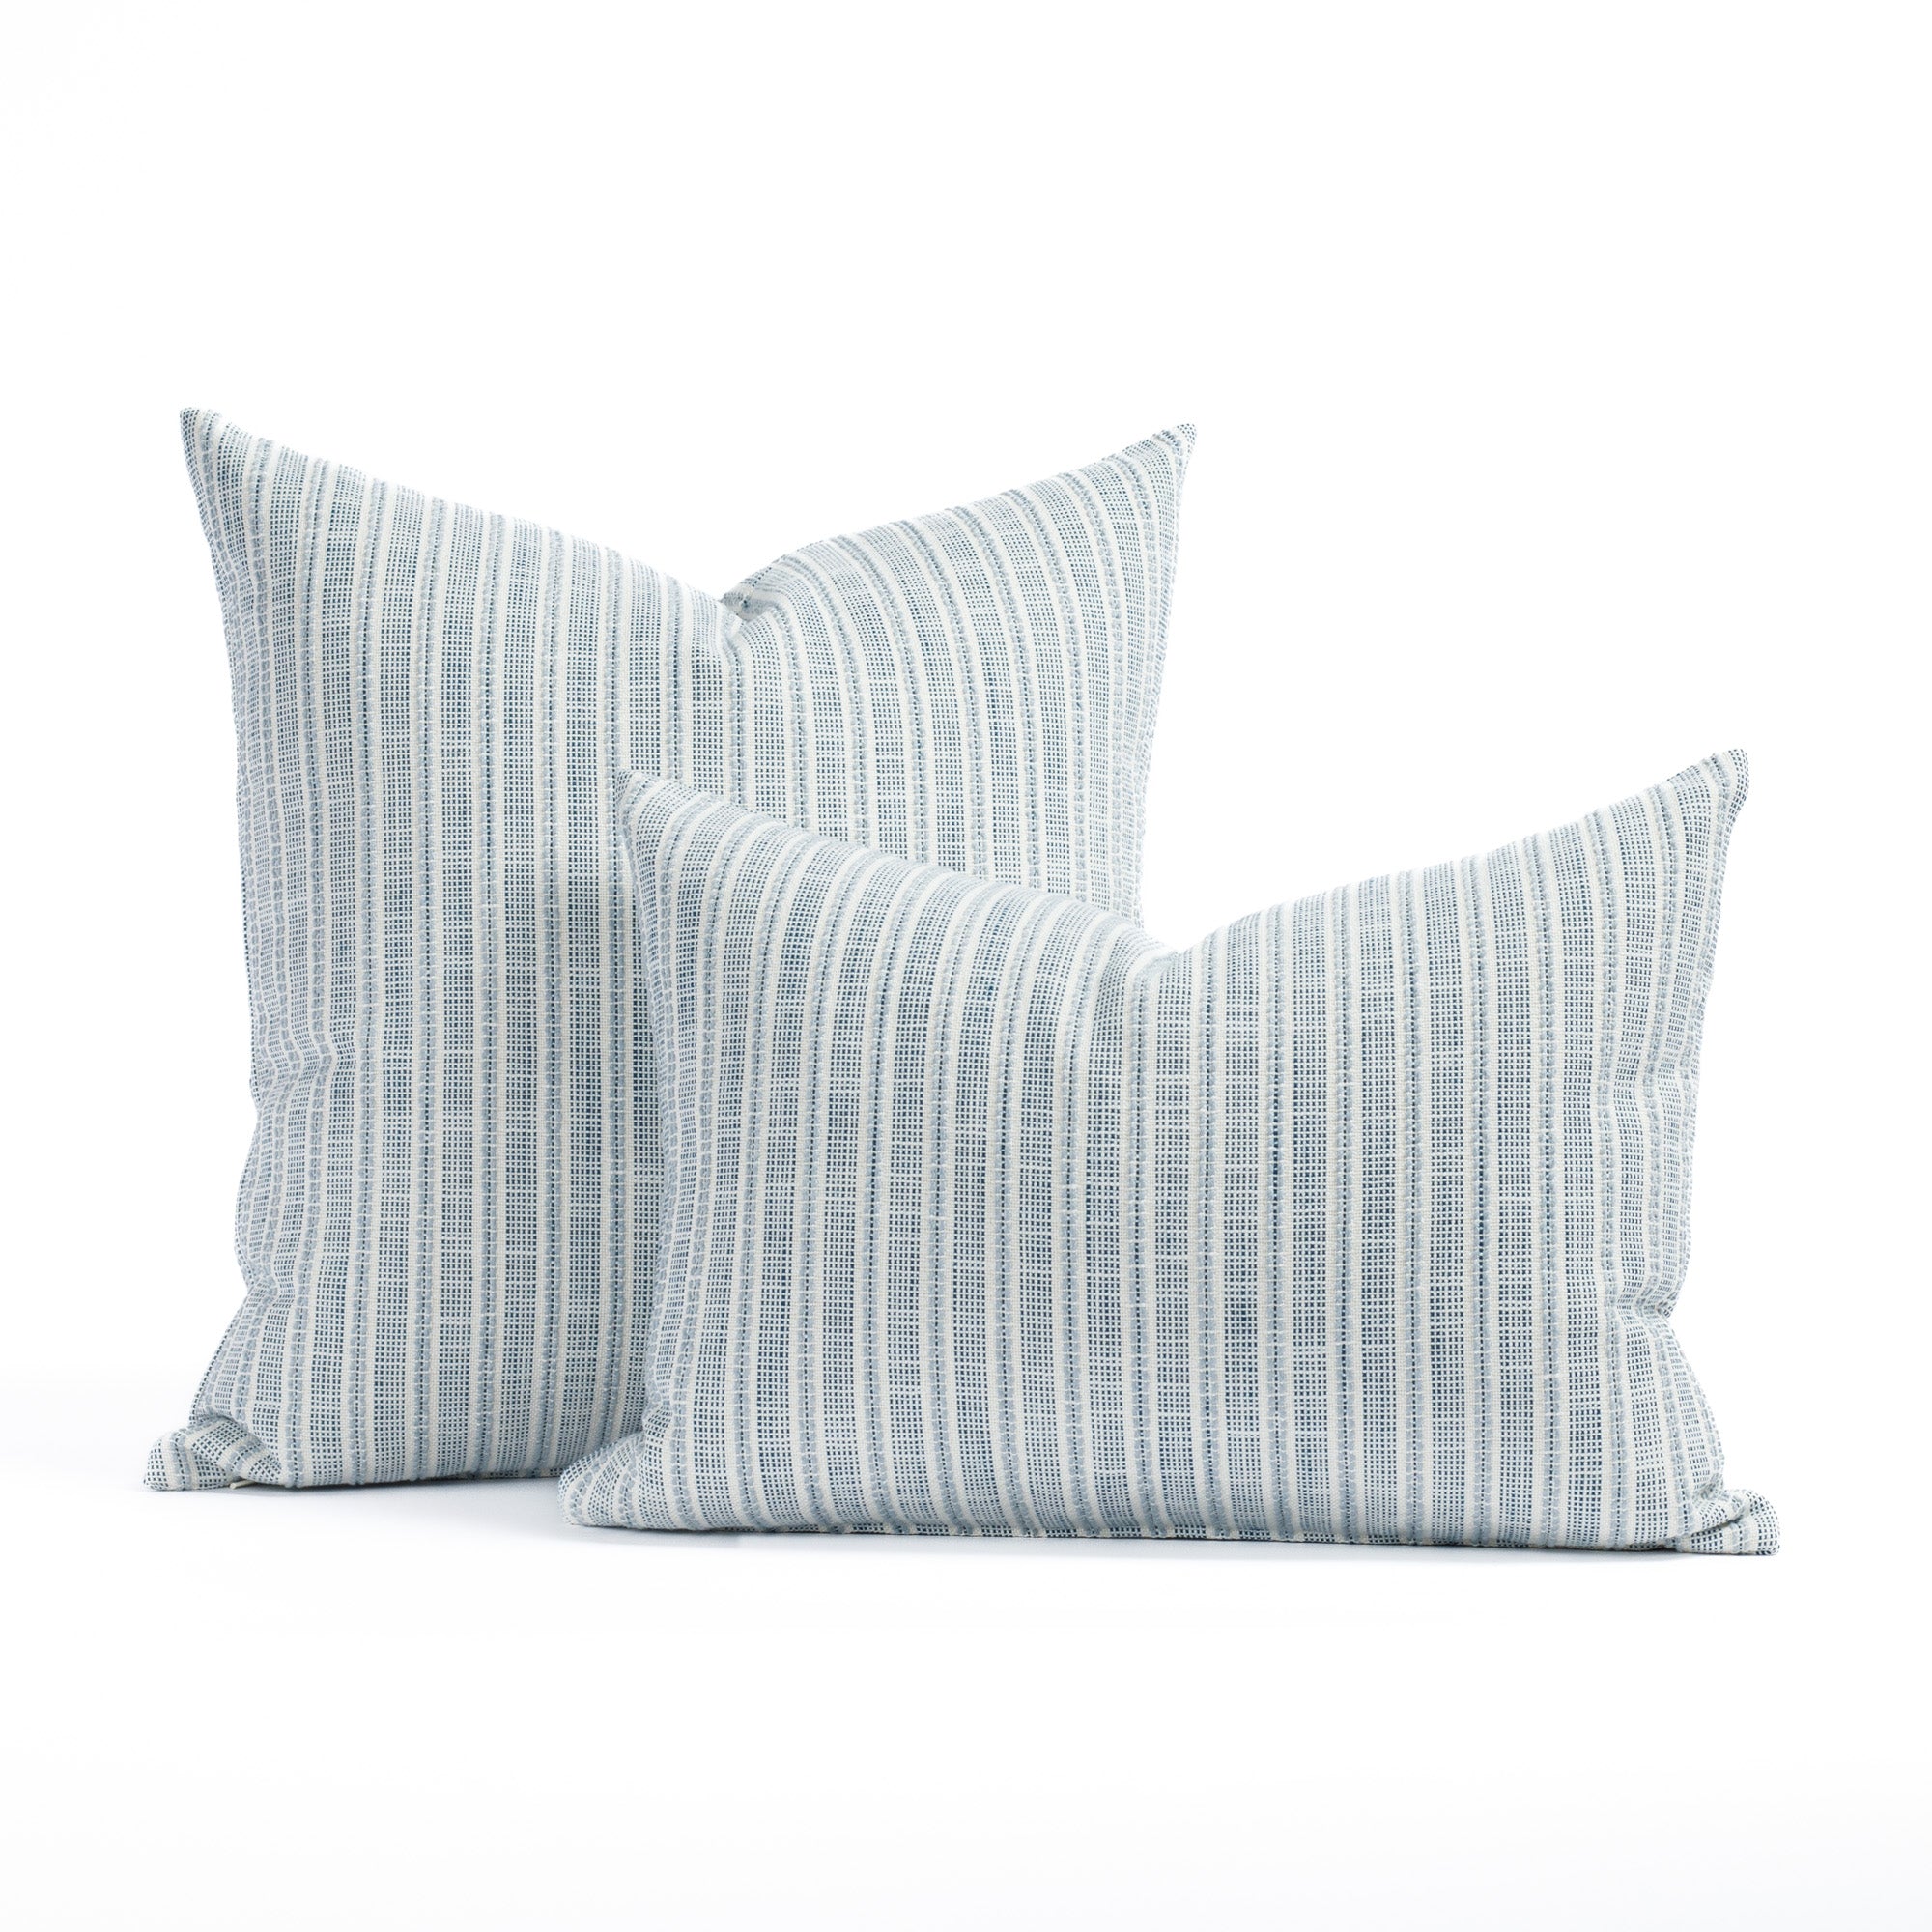 Amalfi Stripe Indigo outdoor pillows in two sizes from Tonic Living